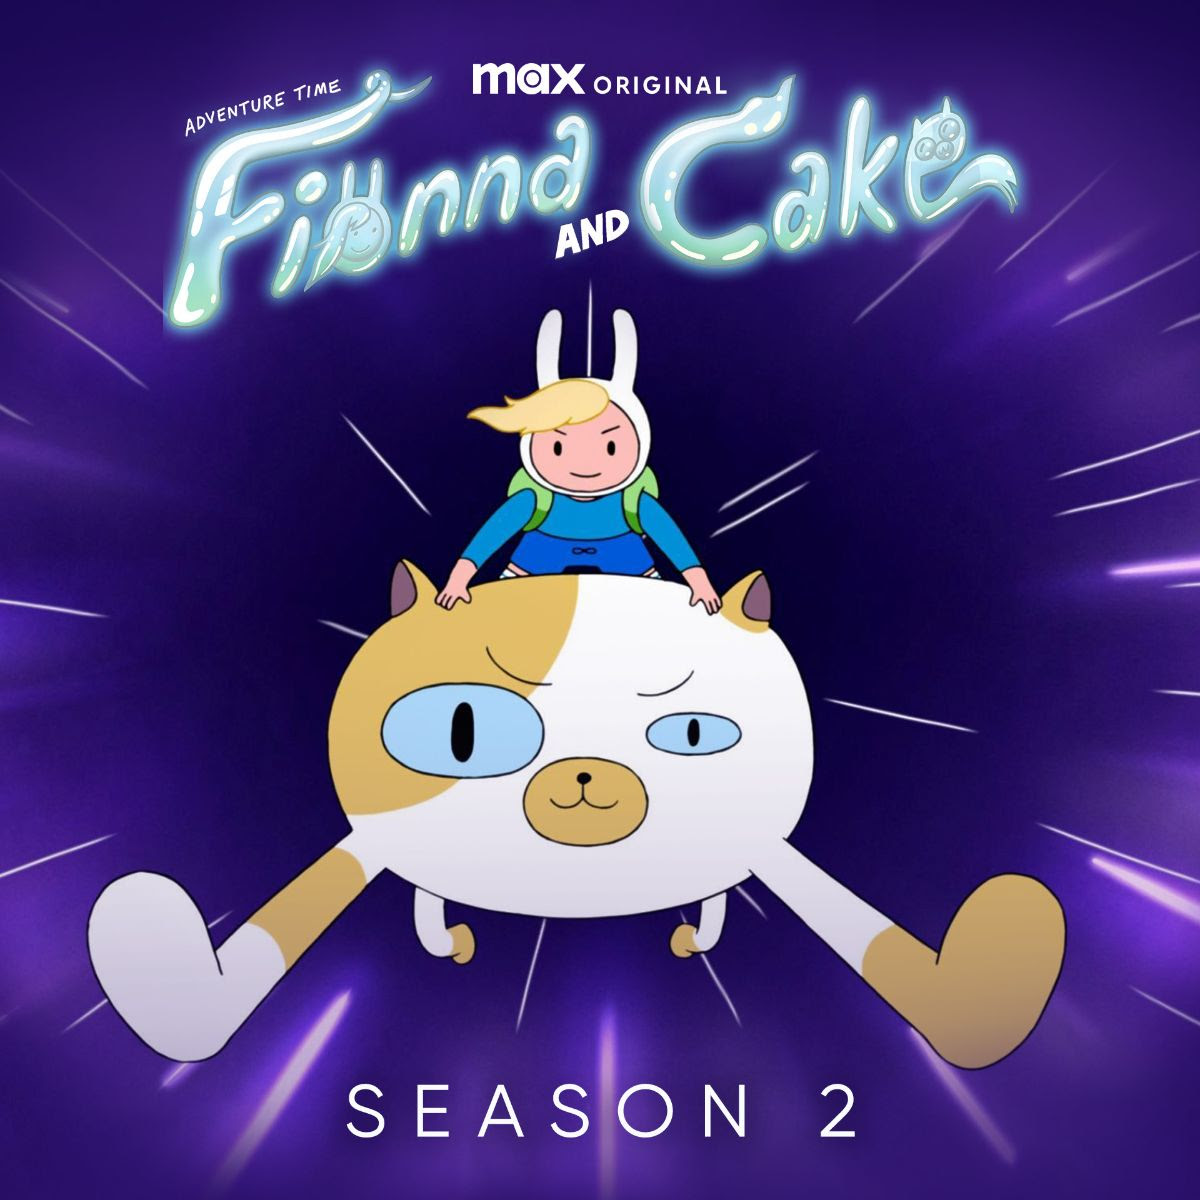 #Adventure Time: Fionna and Cake: Season Two Renewal for Max Animated Series